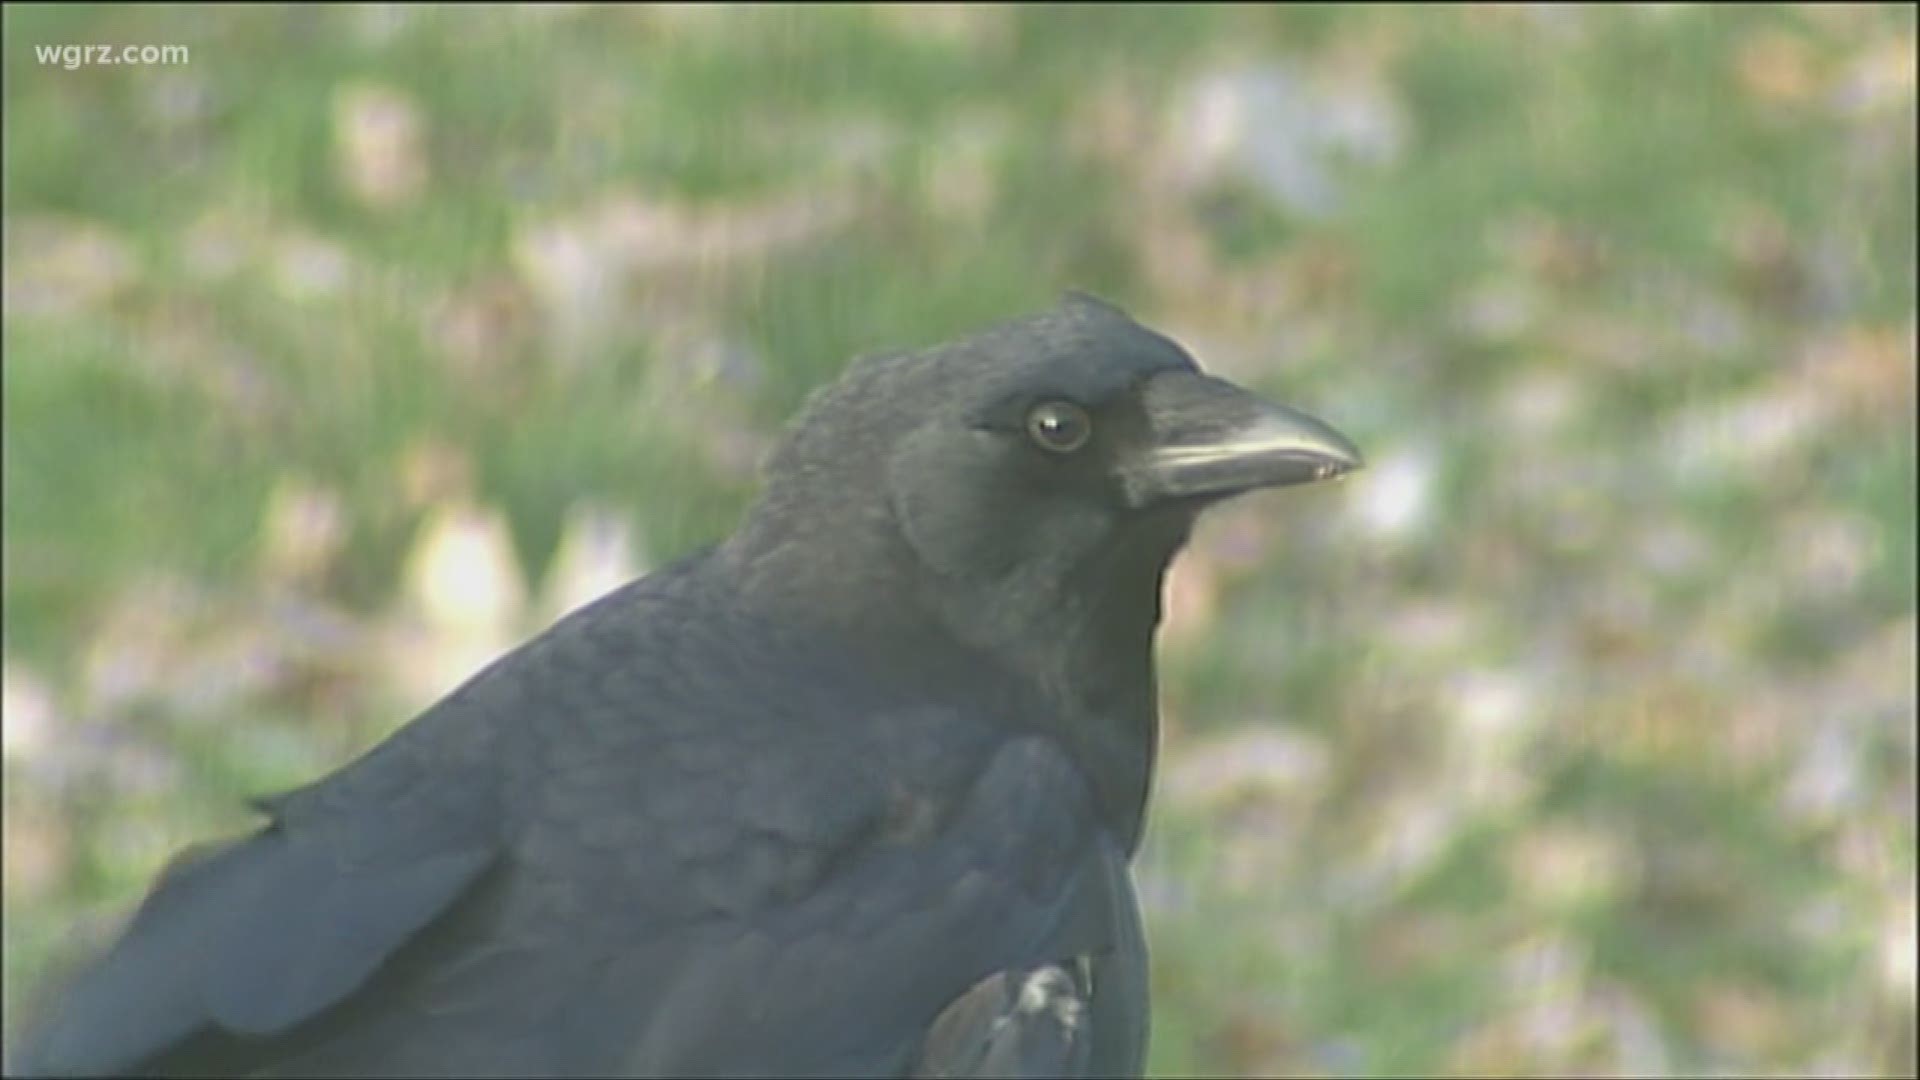 Crows, being among the planet's smartest animals, have made relatively recent adaptations to help them weather the winter.